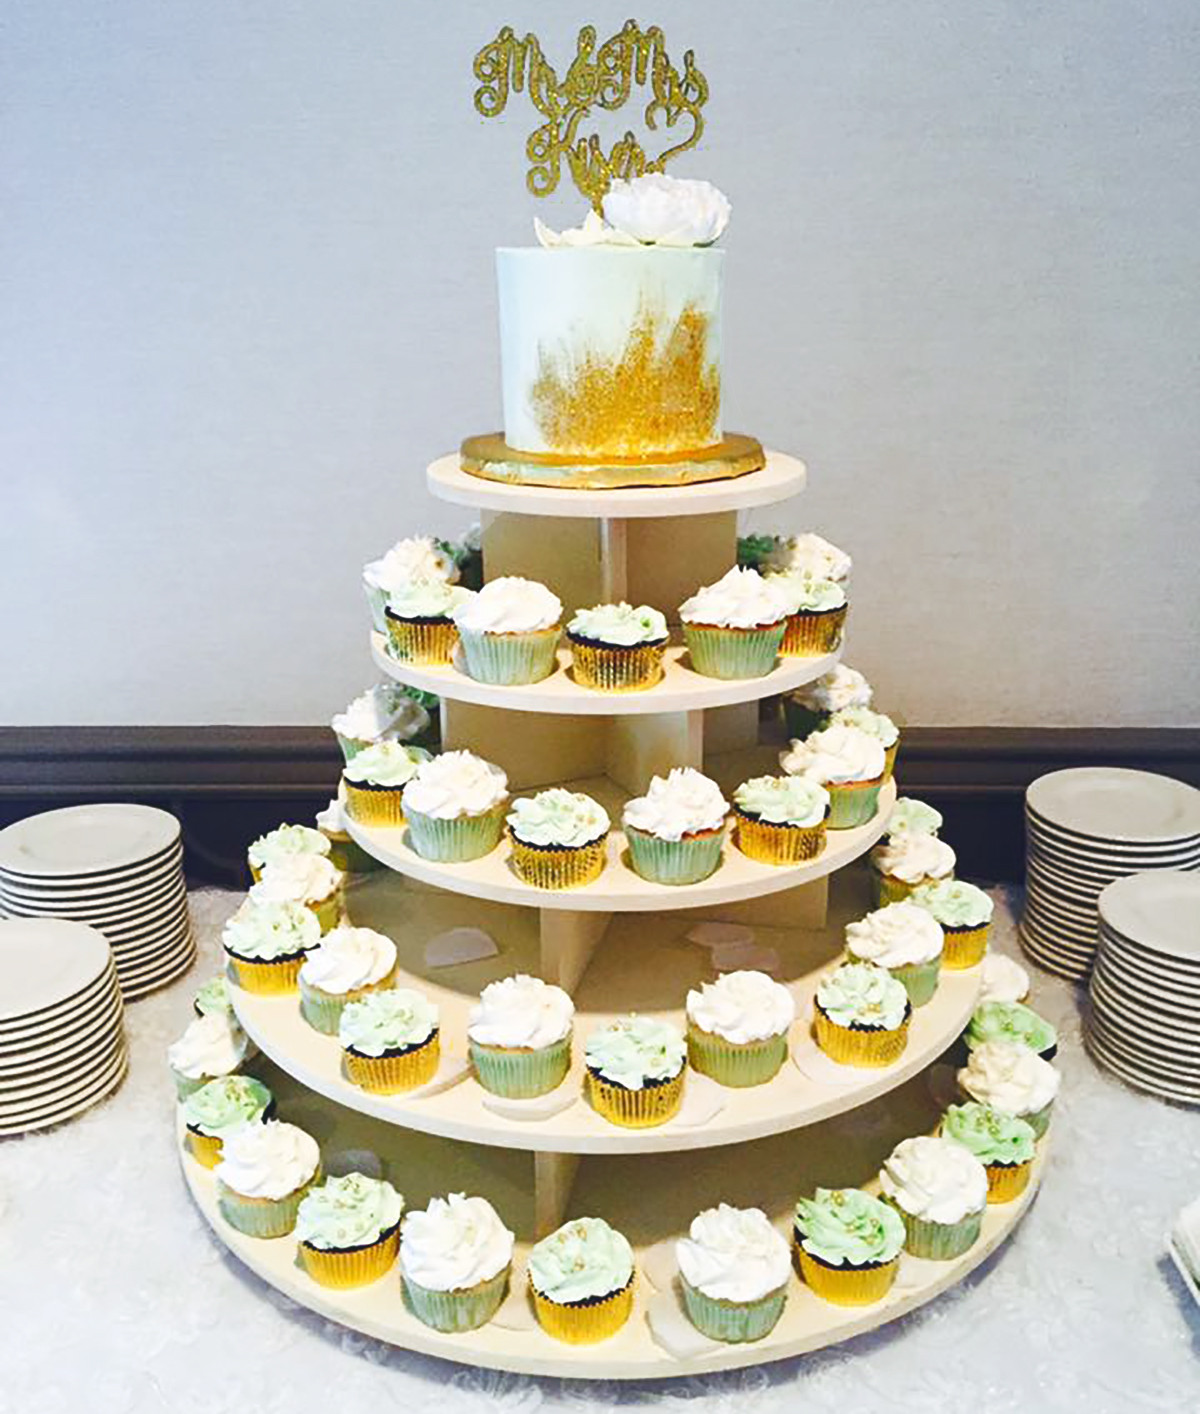 Wedding Cake And Cupcakes
 Wedding Cakes in Marietta Parkersburg & More Heavenly